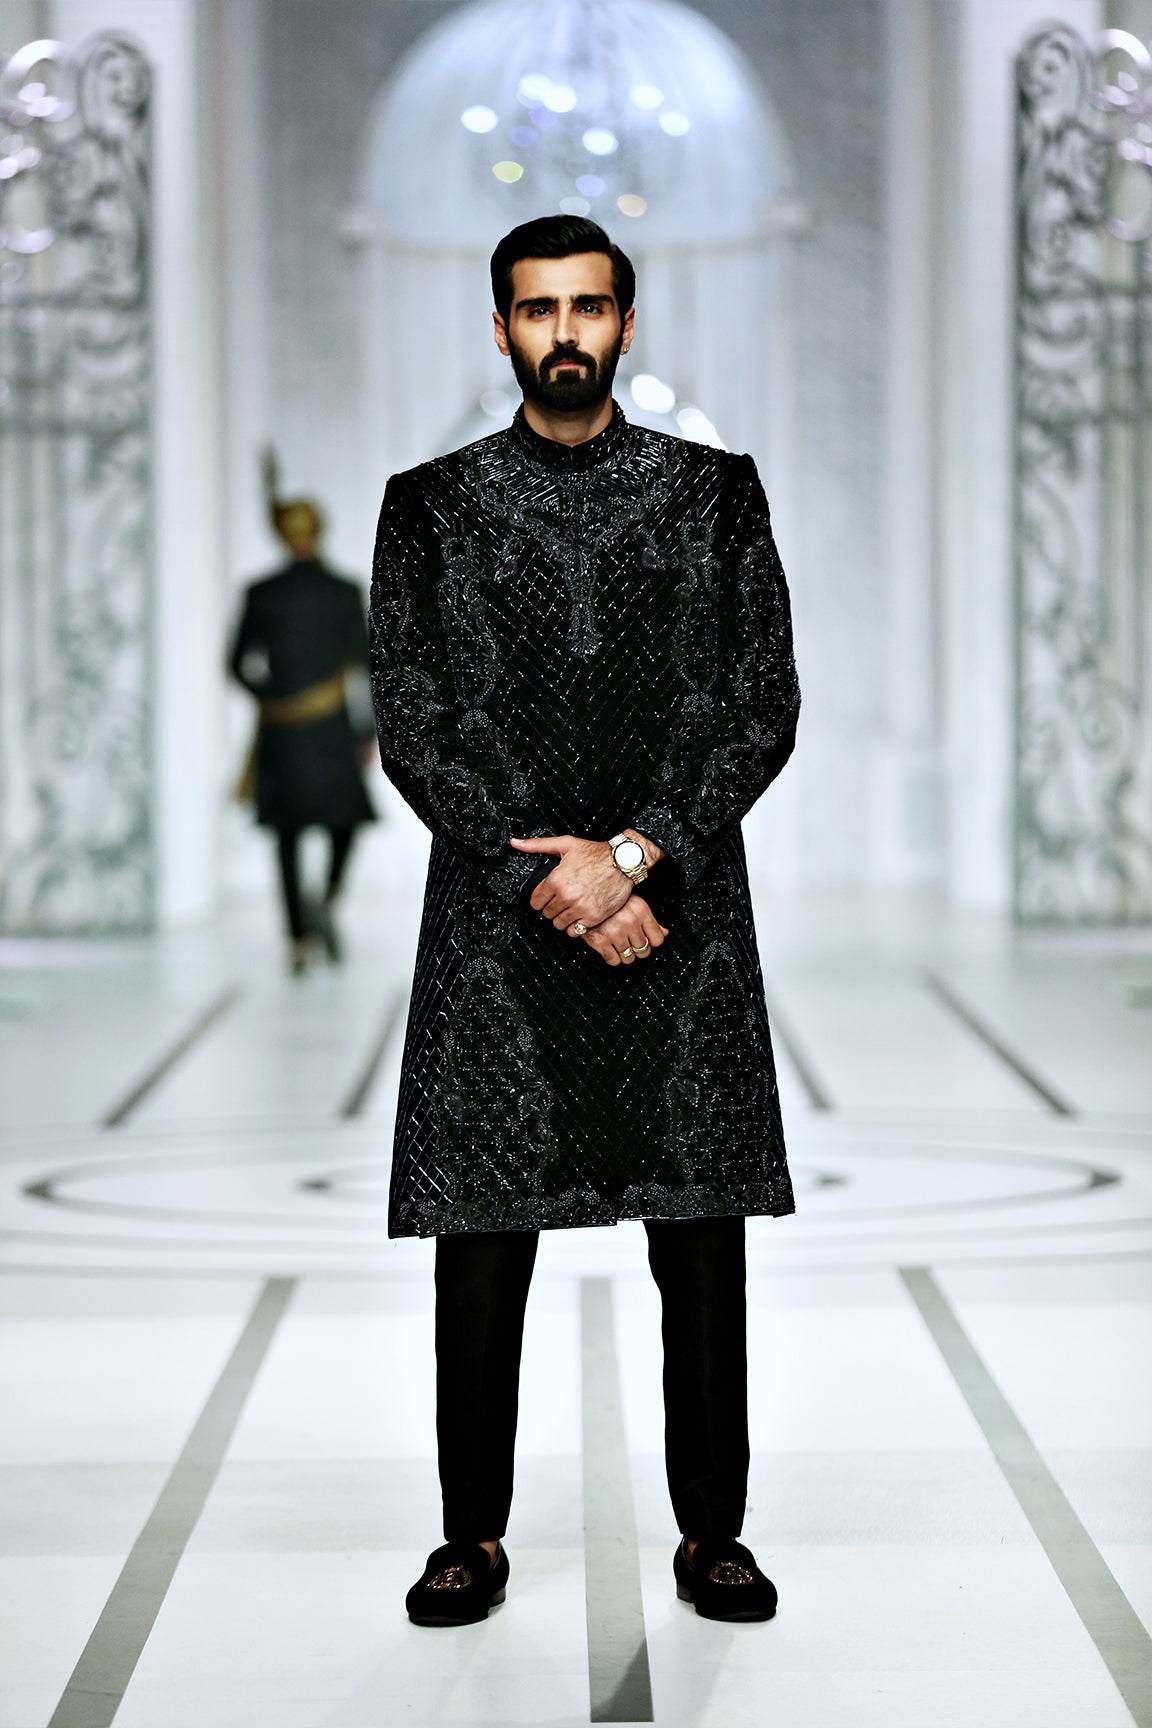 Lehri Black Solitaire Sherwani by BCW 41 - Handcrafted Brilliance for Unforgettable Moments